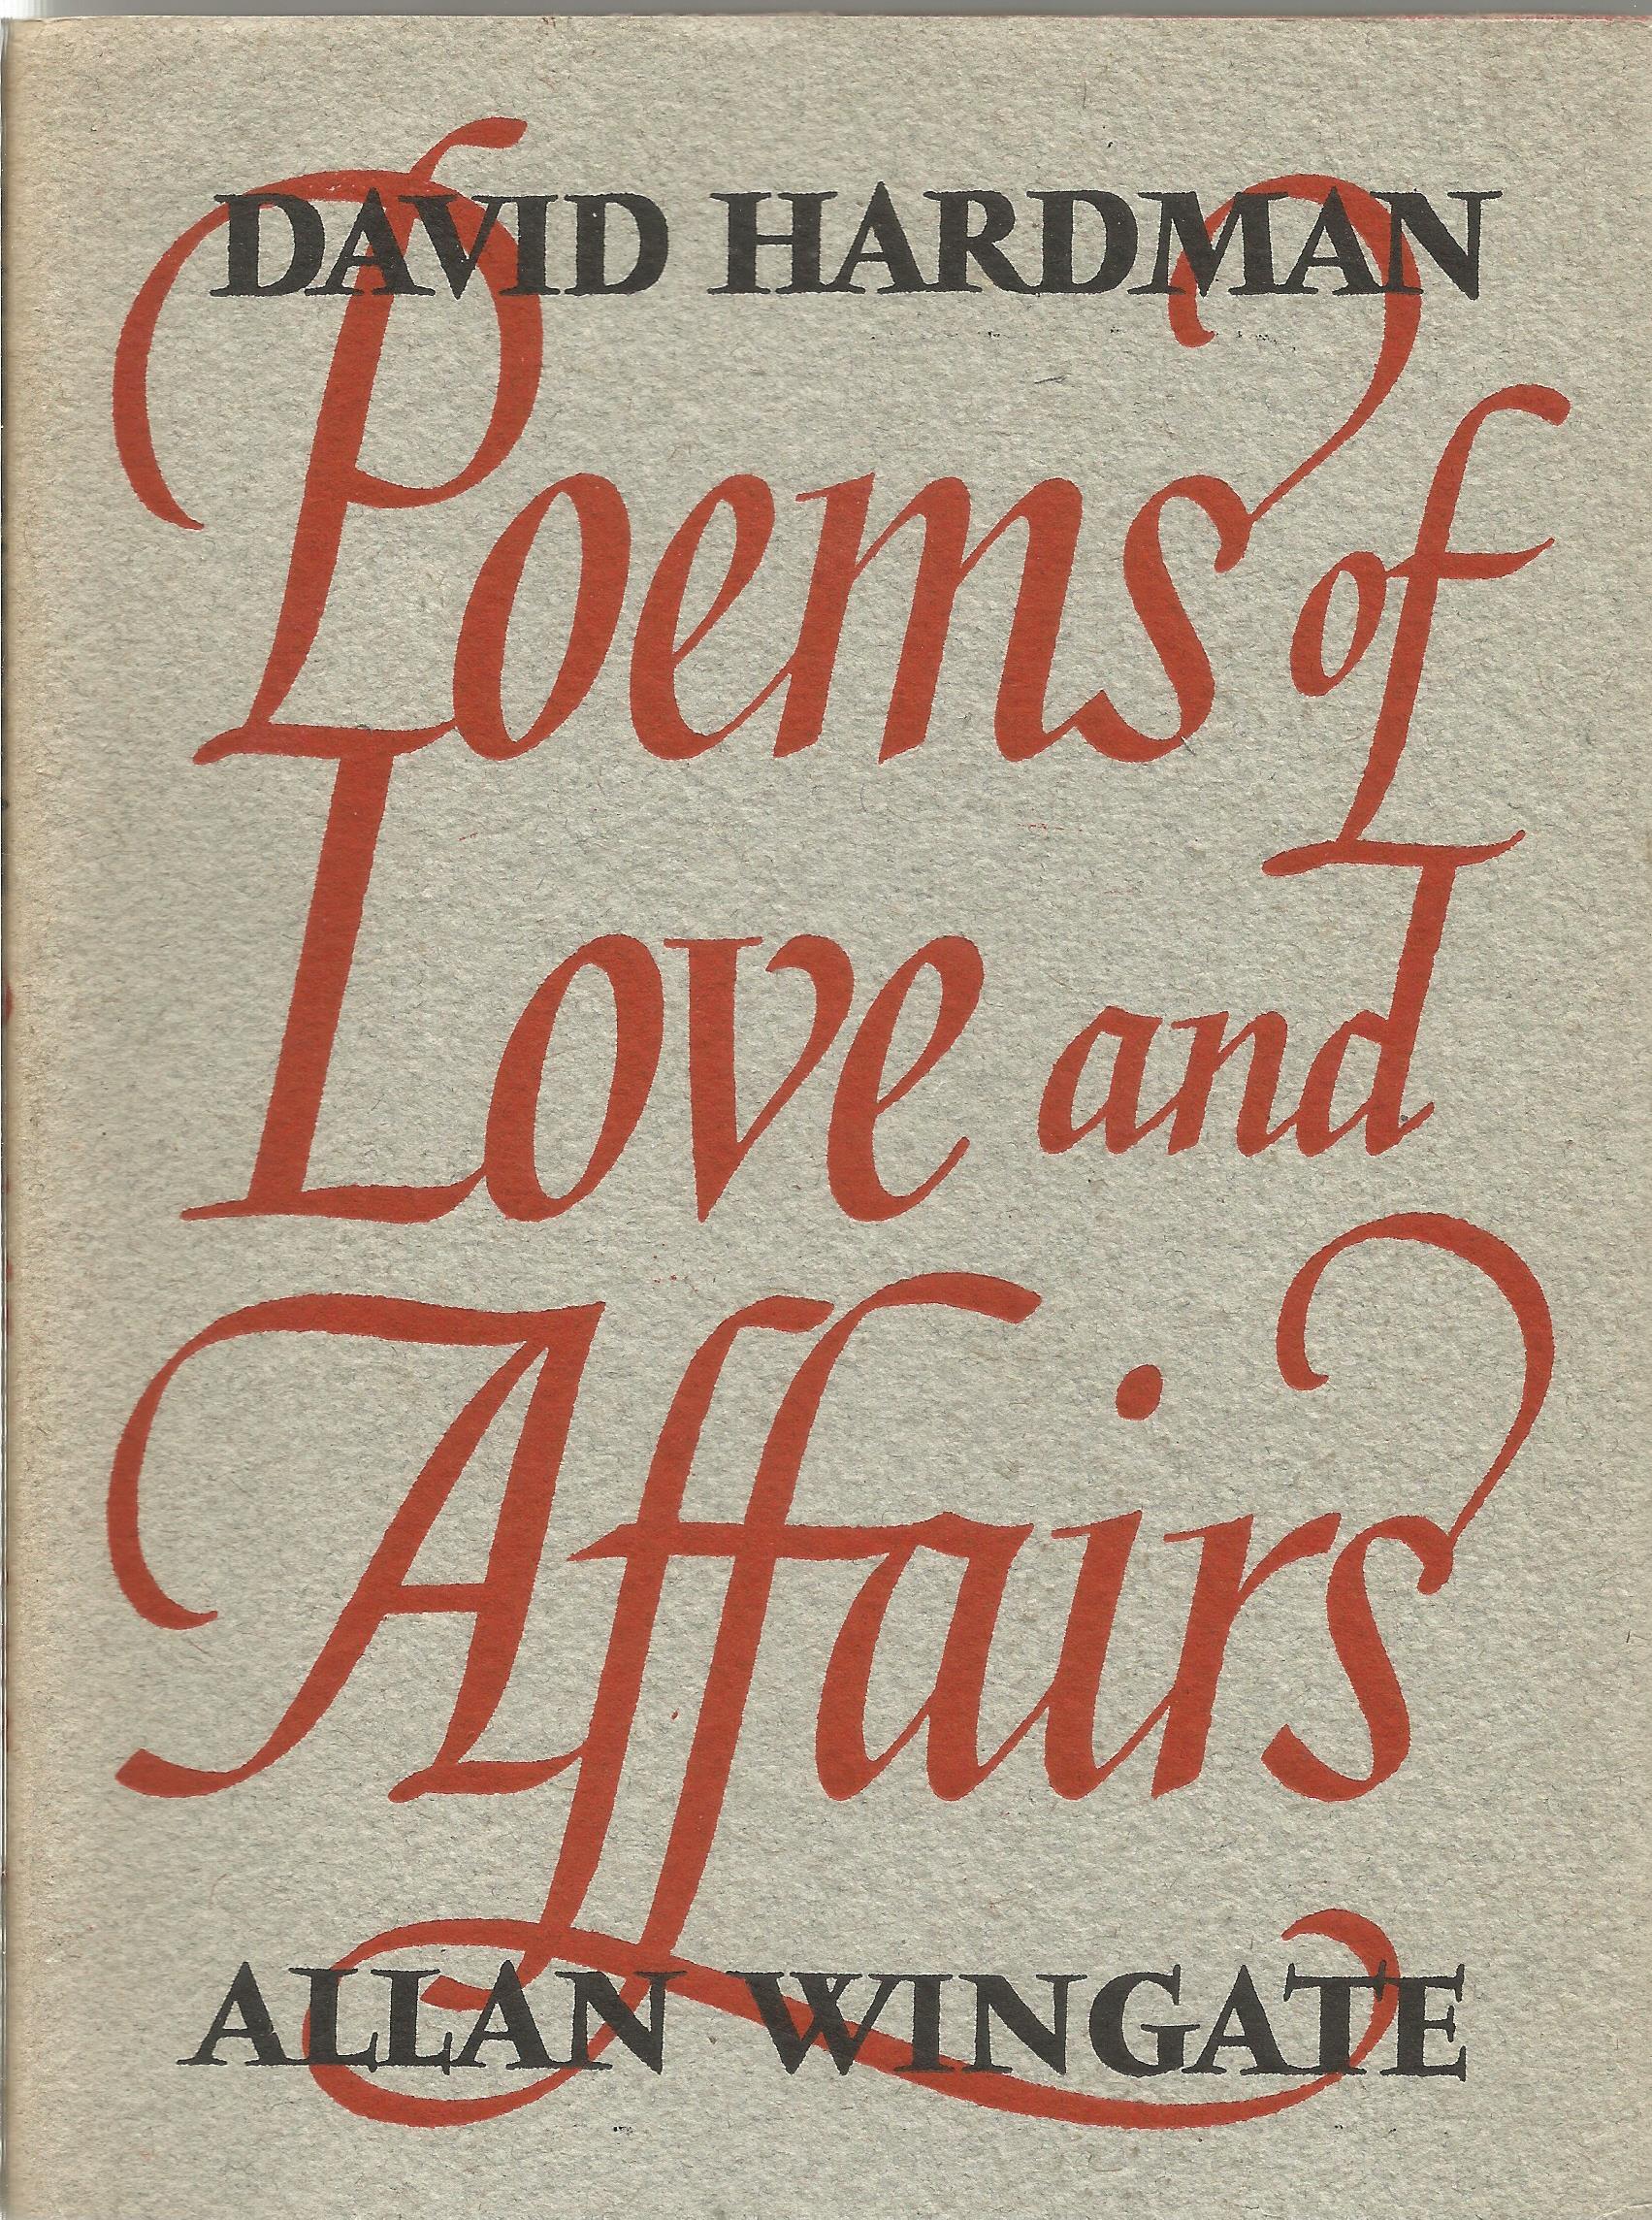 David Hardman Hardback Book Poems of Love and Affairs signed by the Author on the Title Page dated